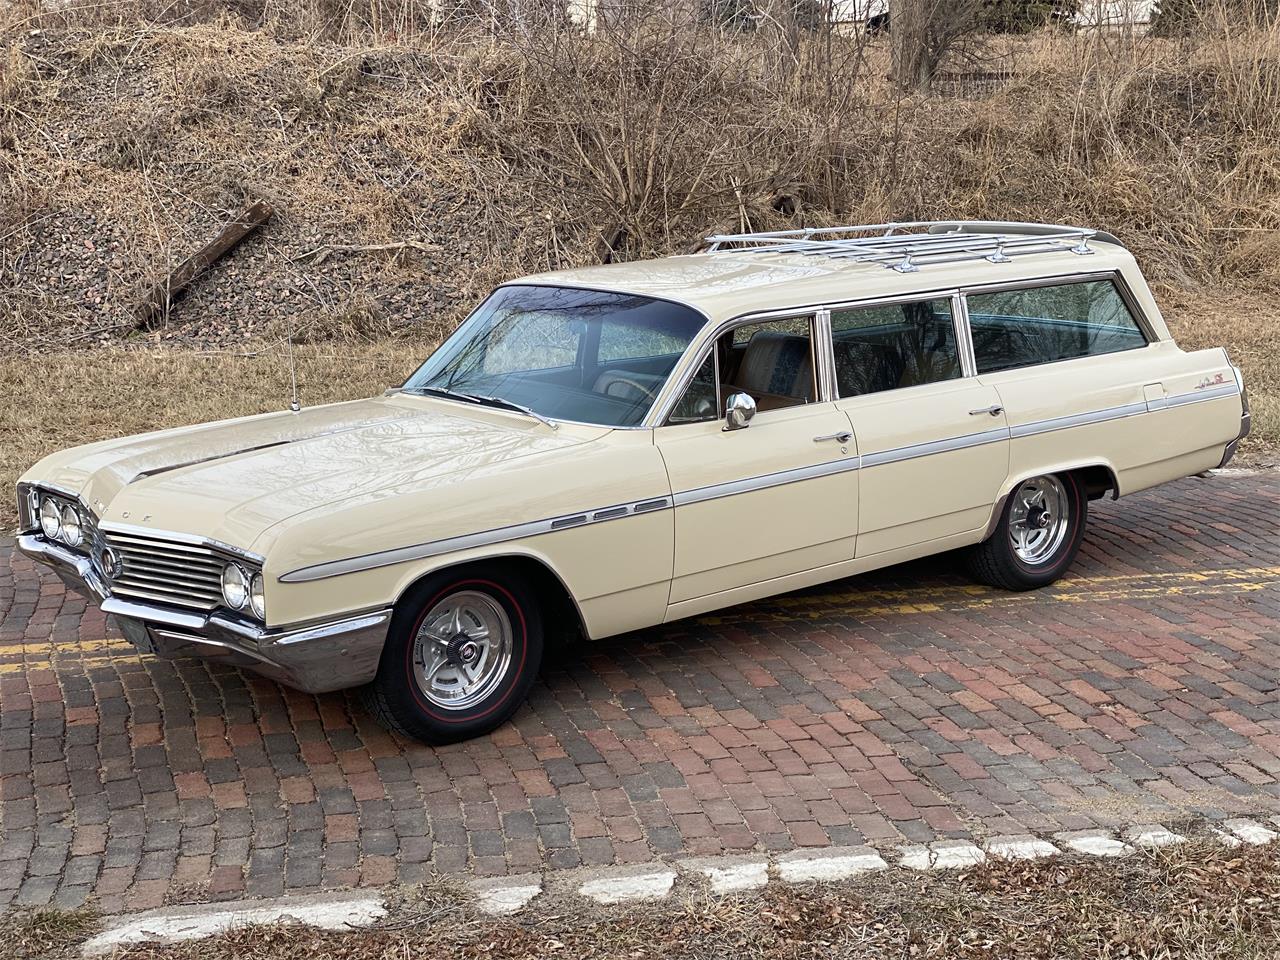 1964 Buick LeSabre Wagon for sale in Elkhorn, NE – photo 87